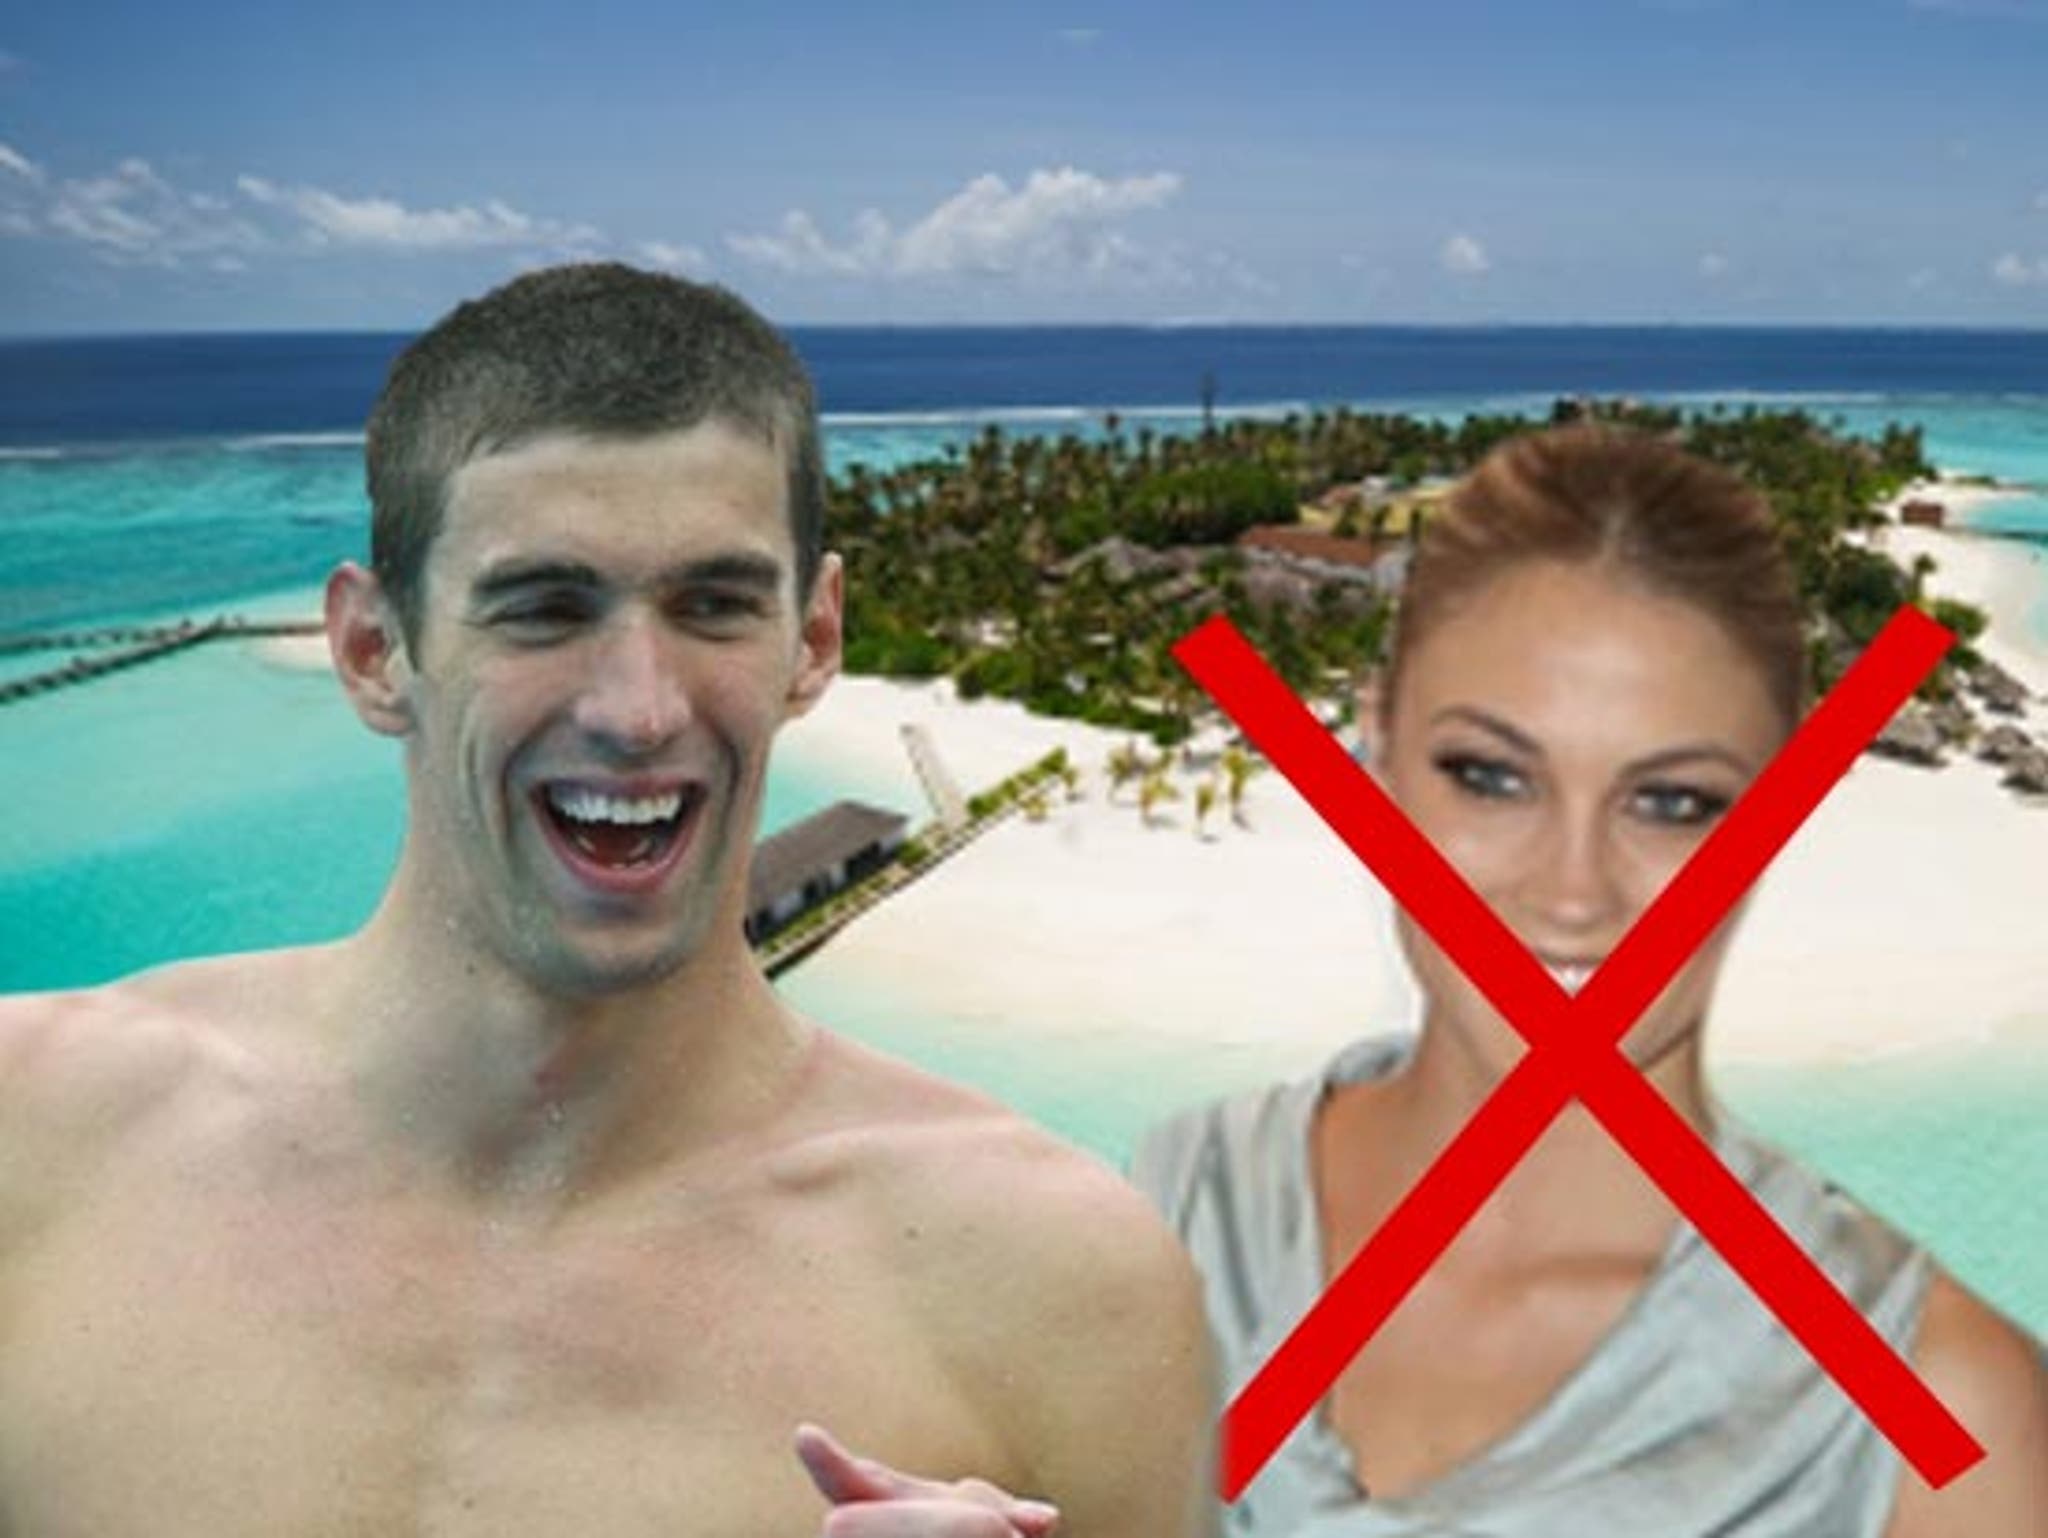 Michael Phelps DITCHING GF Megan Rossee to Bro Out on Tropical Island picture